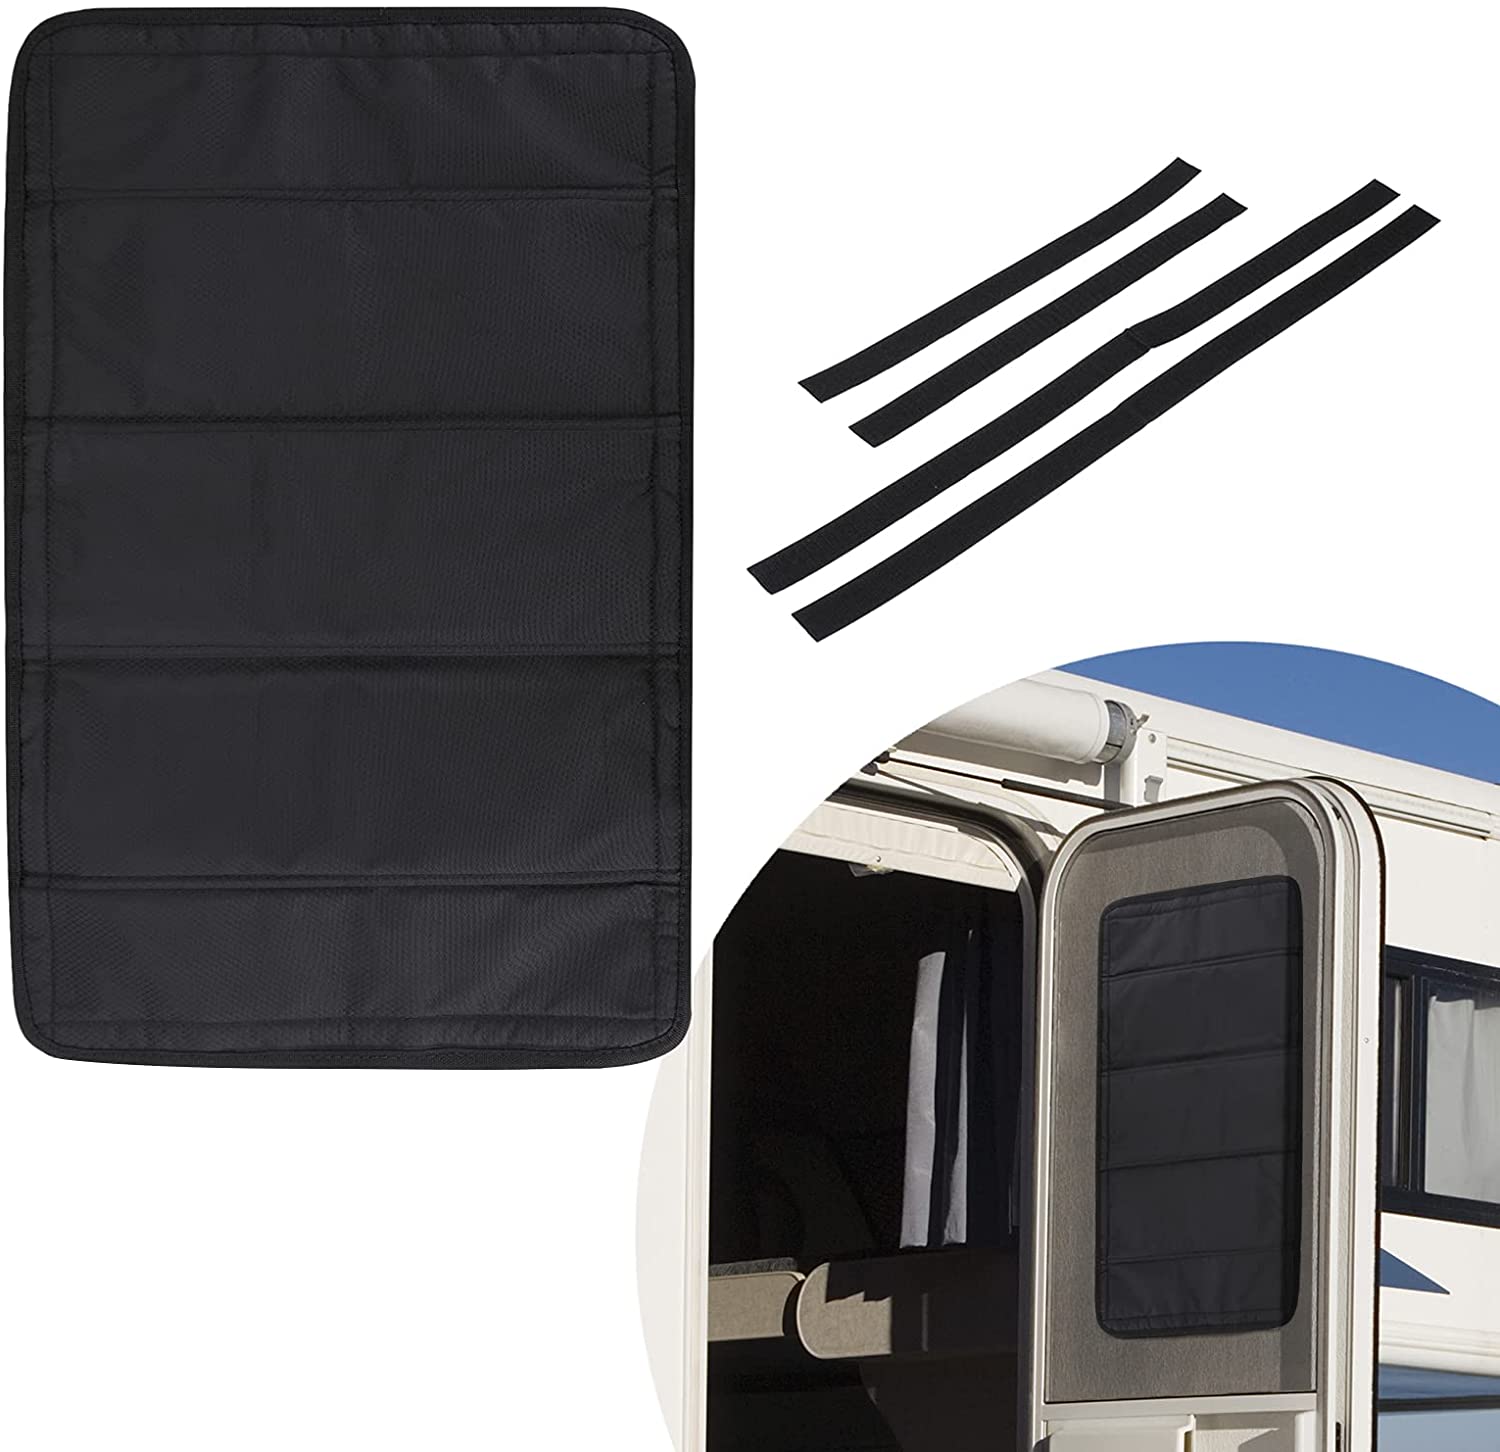 Foldable RV Sun Shade Windshield Blackout Shower Curtains Coverage RV  Accessories Fits for Most RV Interior DoorWindow Oxford Materials  Black(25X16)